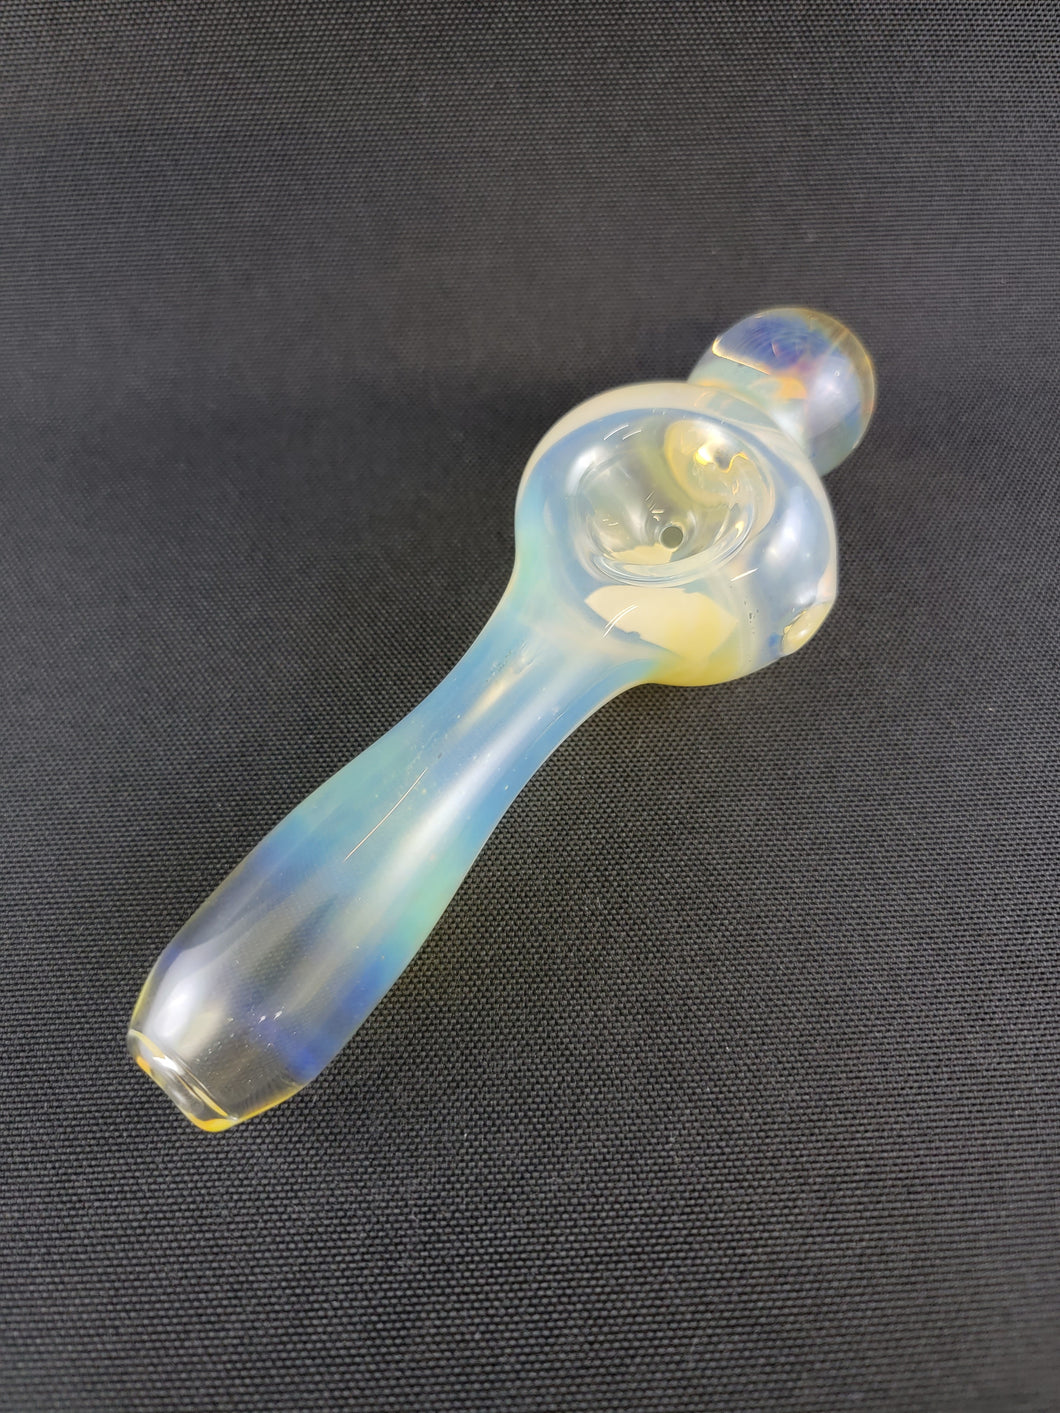 Hippie Hookup Glass Fumed Bowl Pipe With Fumed Bubble Explosion